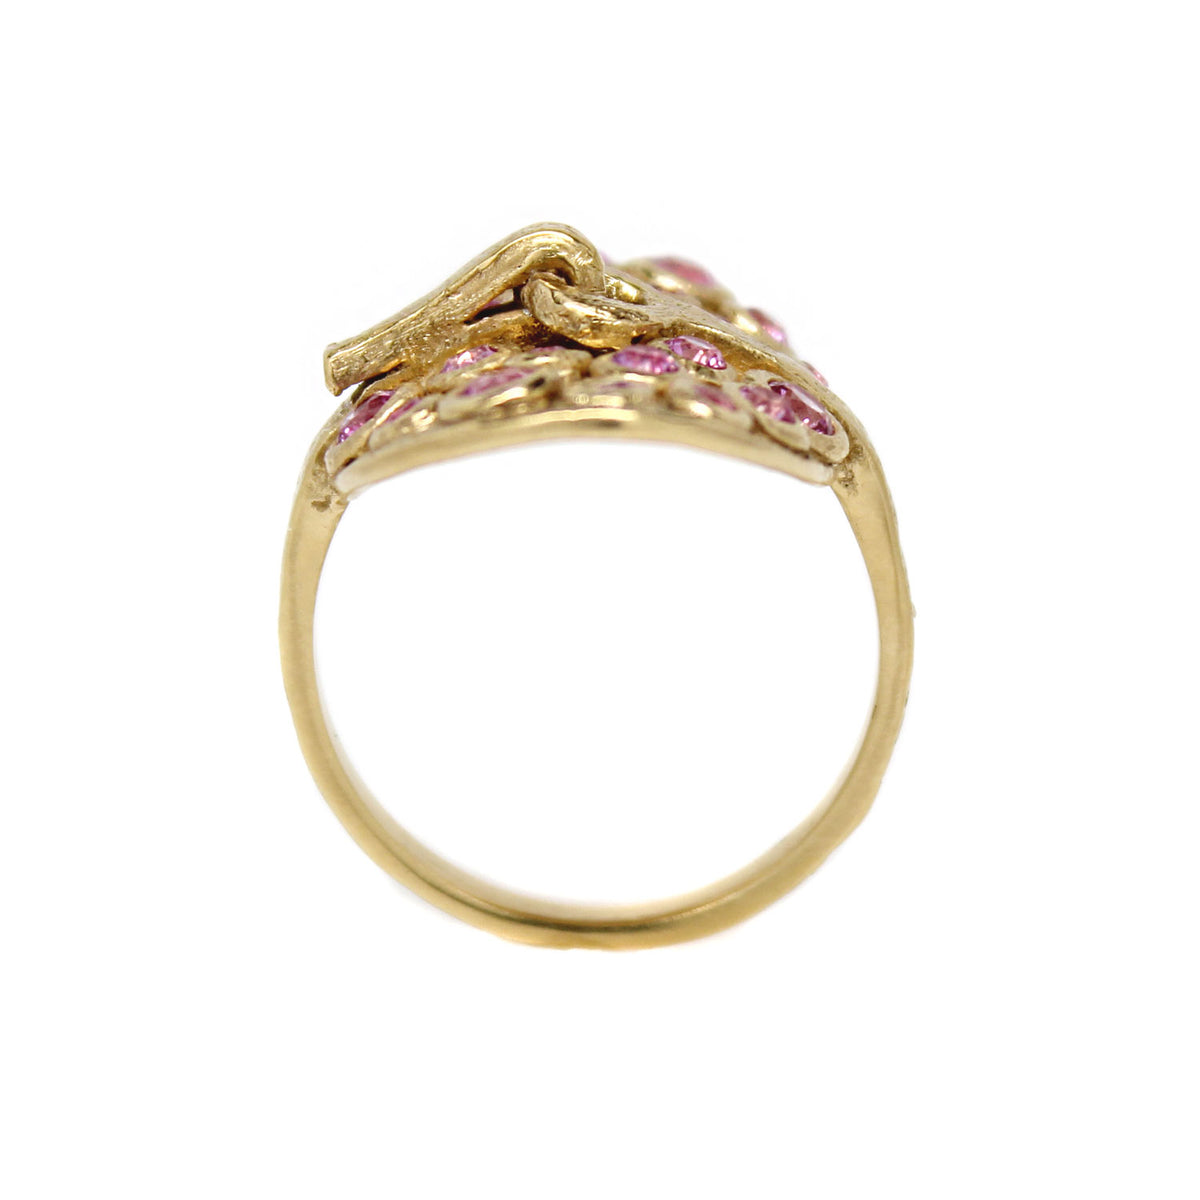 One-of-a-Kind Strapped Ring with Pink Tourmaline